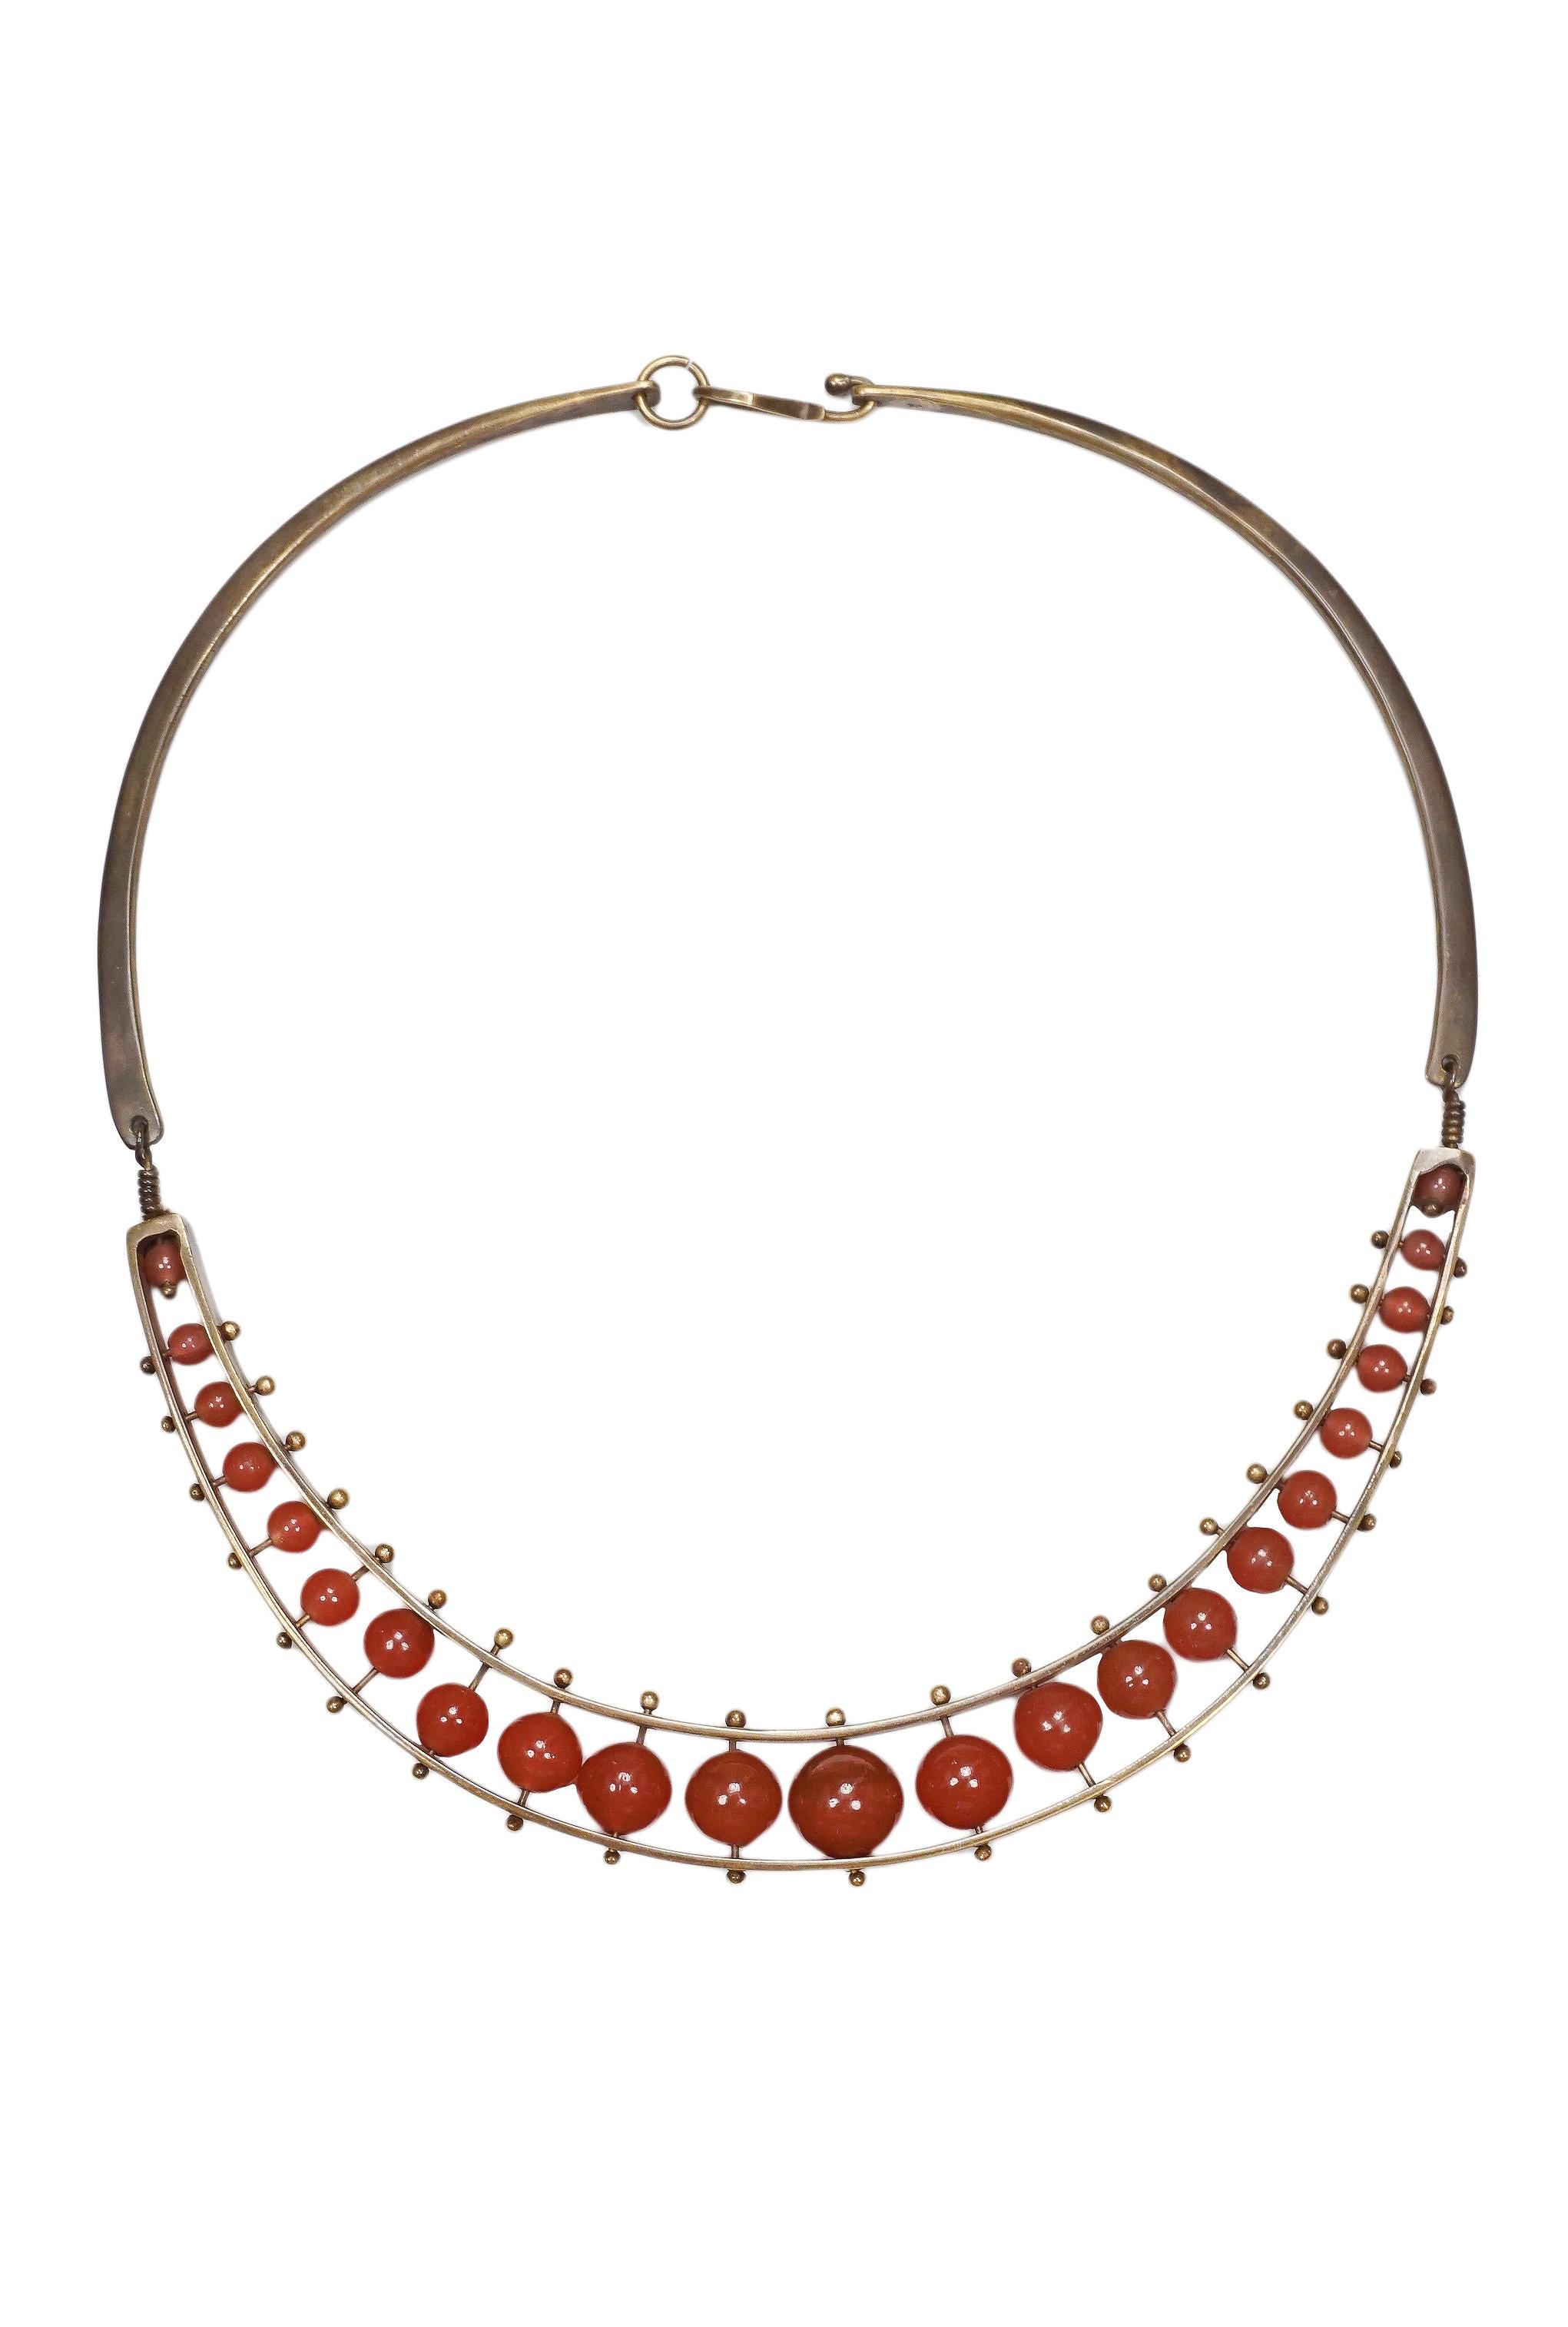 Resurrection Vintage is excited to offer a vintage Jack Boyd bronze necklace with round carnelian gemstones fastened with bronze pins and balls. Circa, 1970's.

Jack Boyd
One Size
Metal and Carnelian 
Excellent Vintage Condition
Authenticity